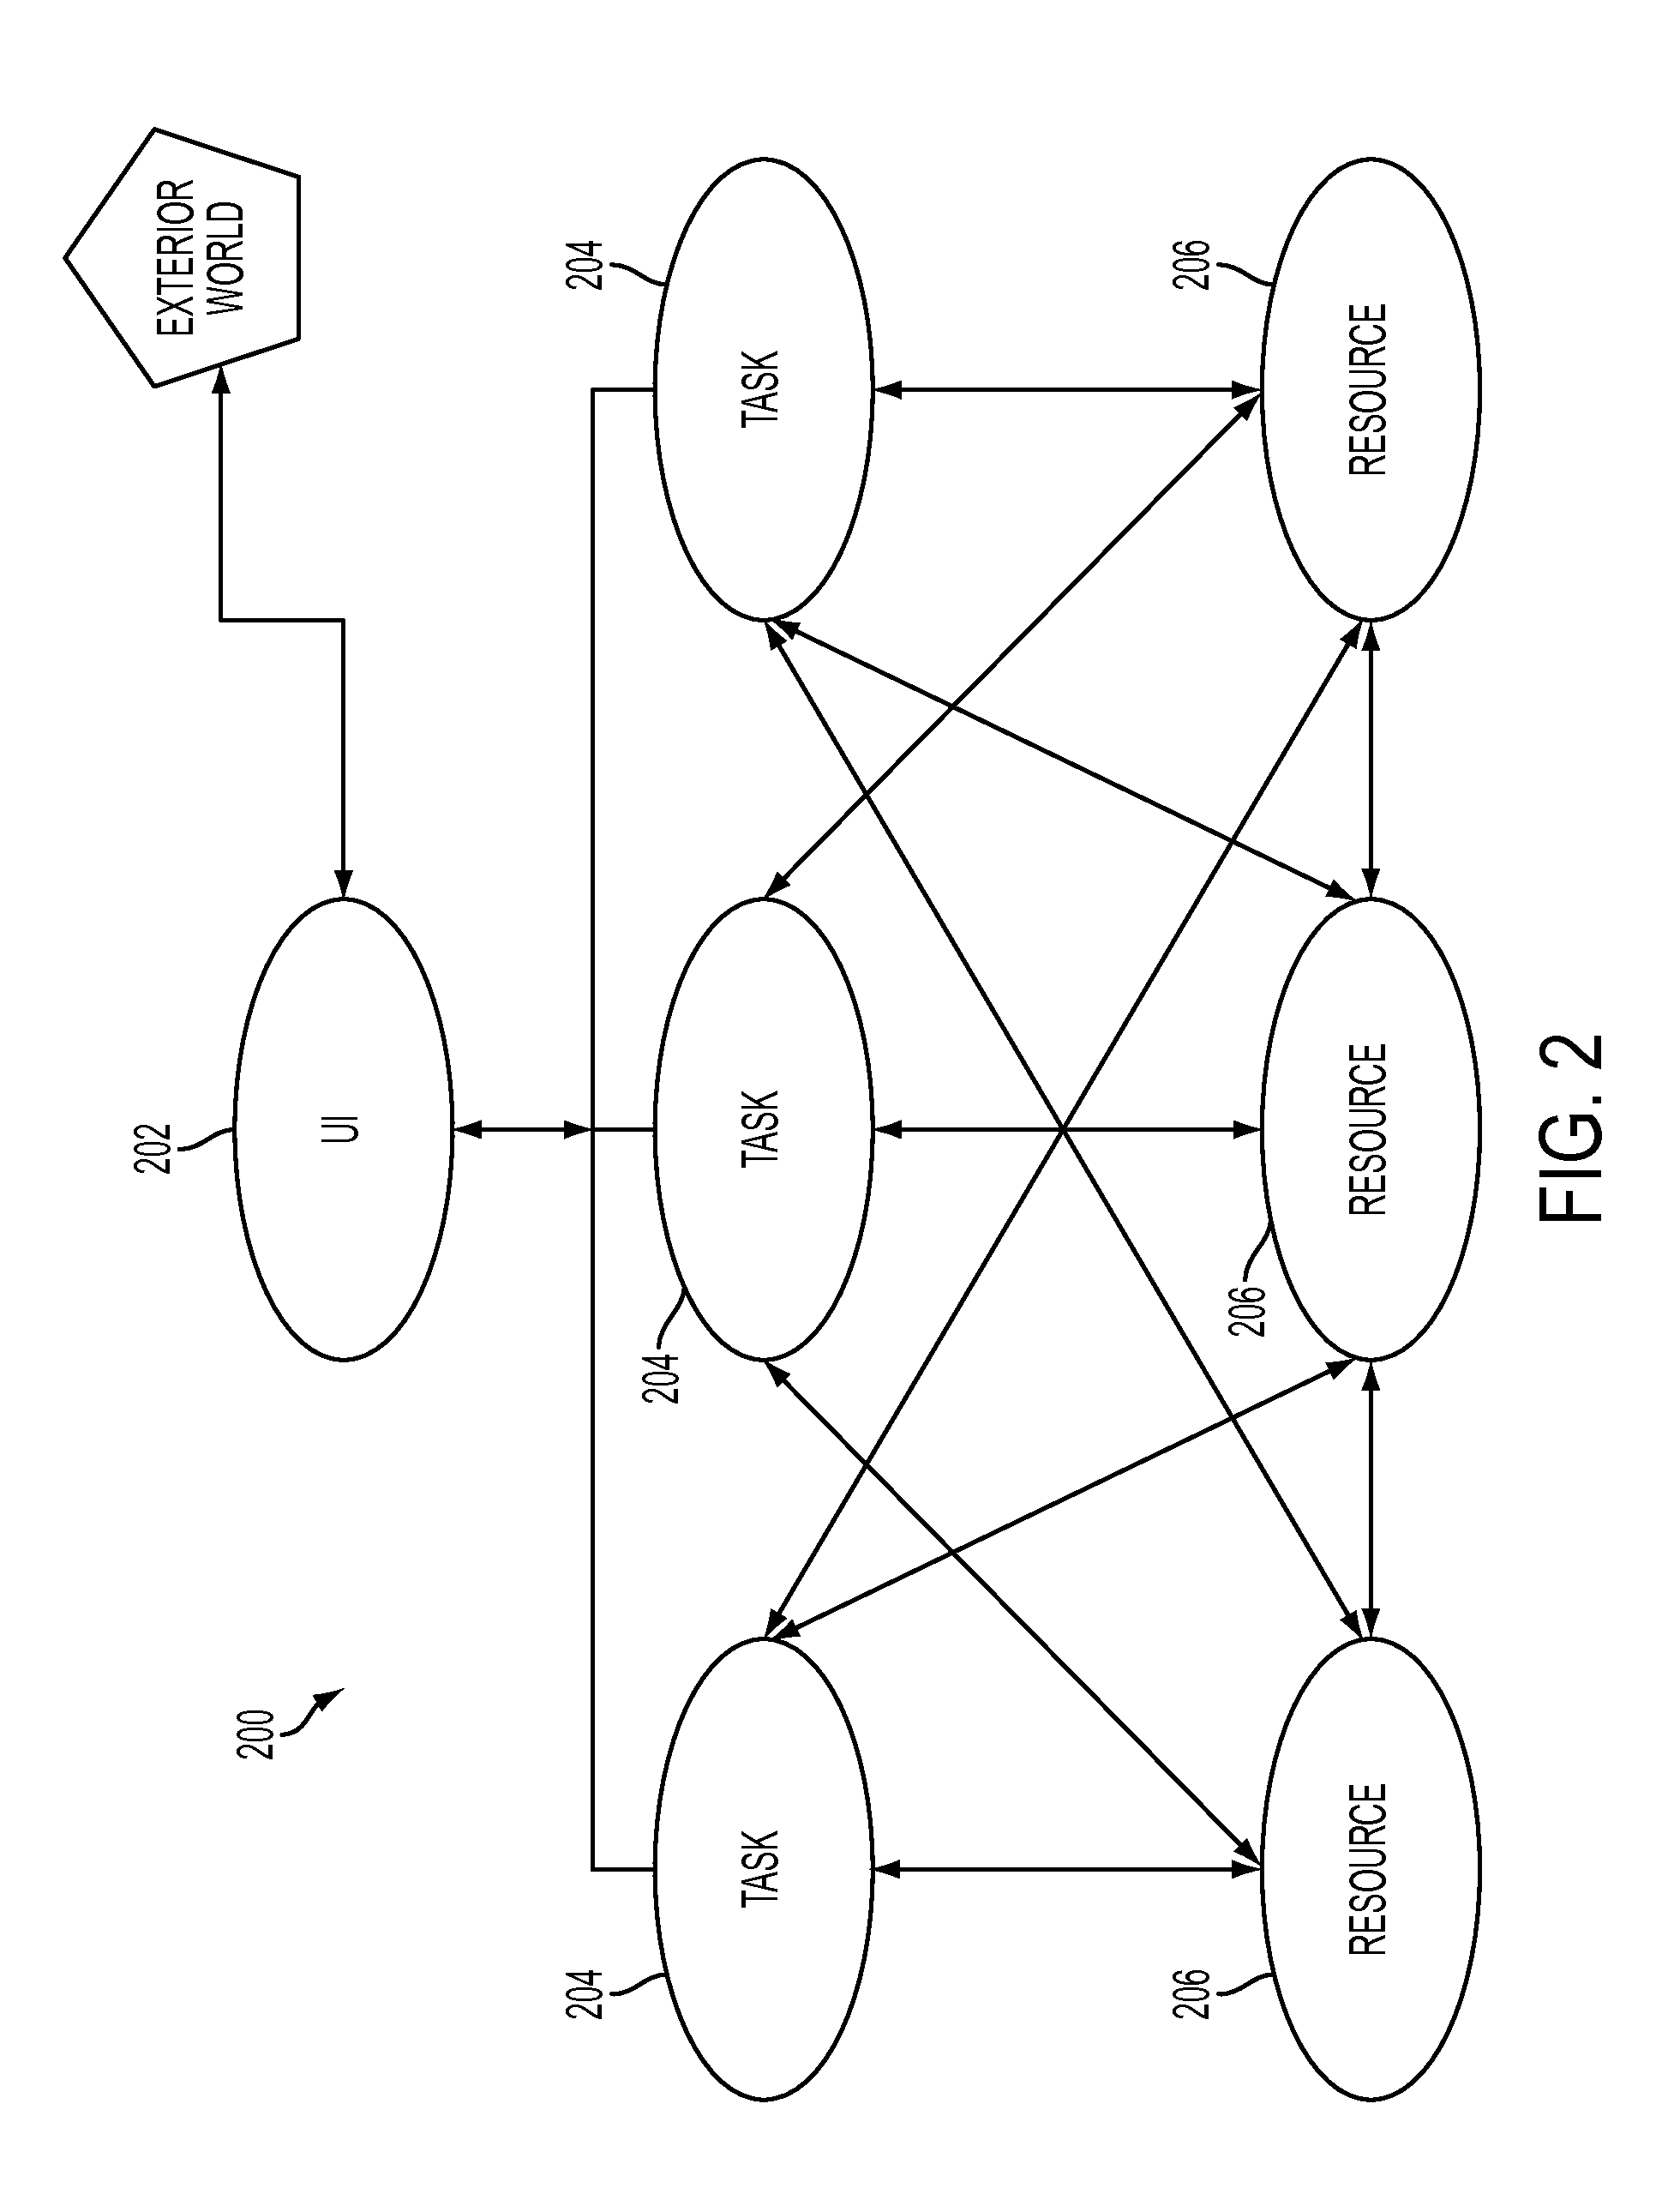 Multi-agent system for distributed manufacturing scheduling with genetic algorithms and tabu search